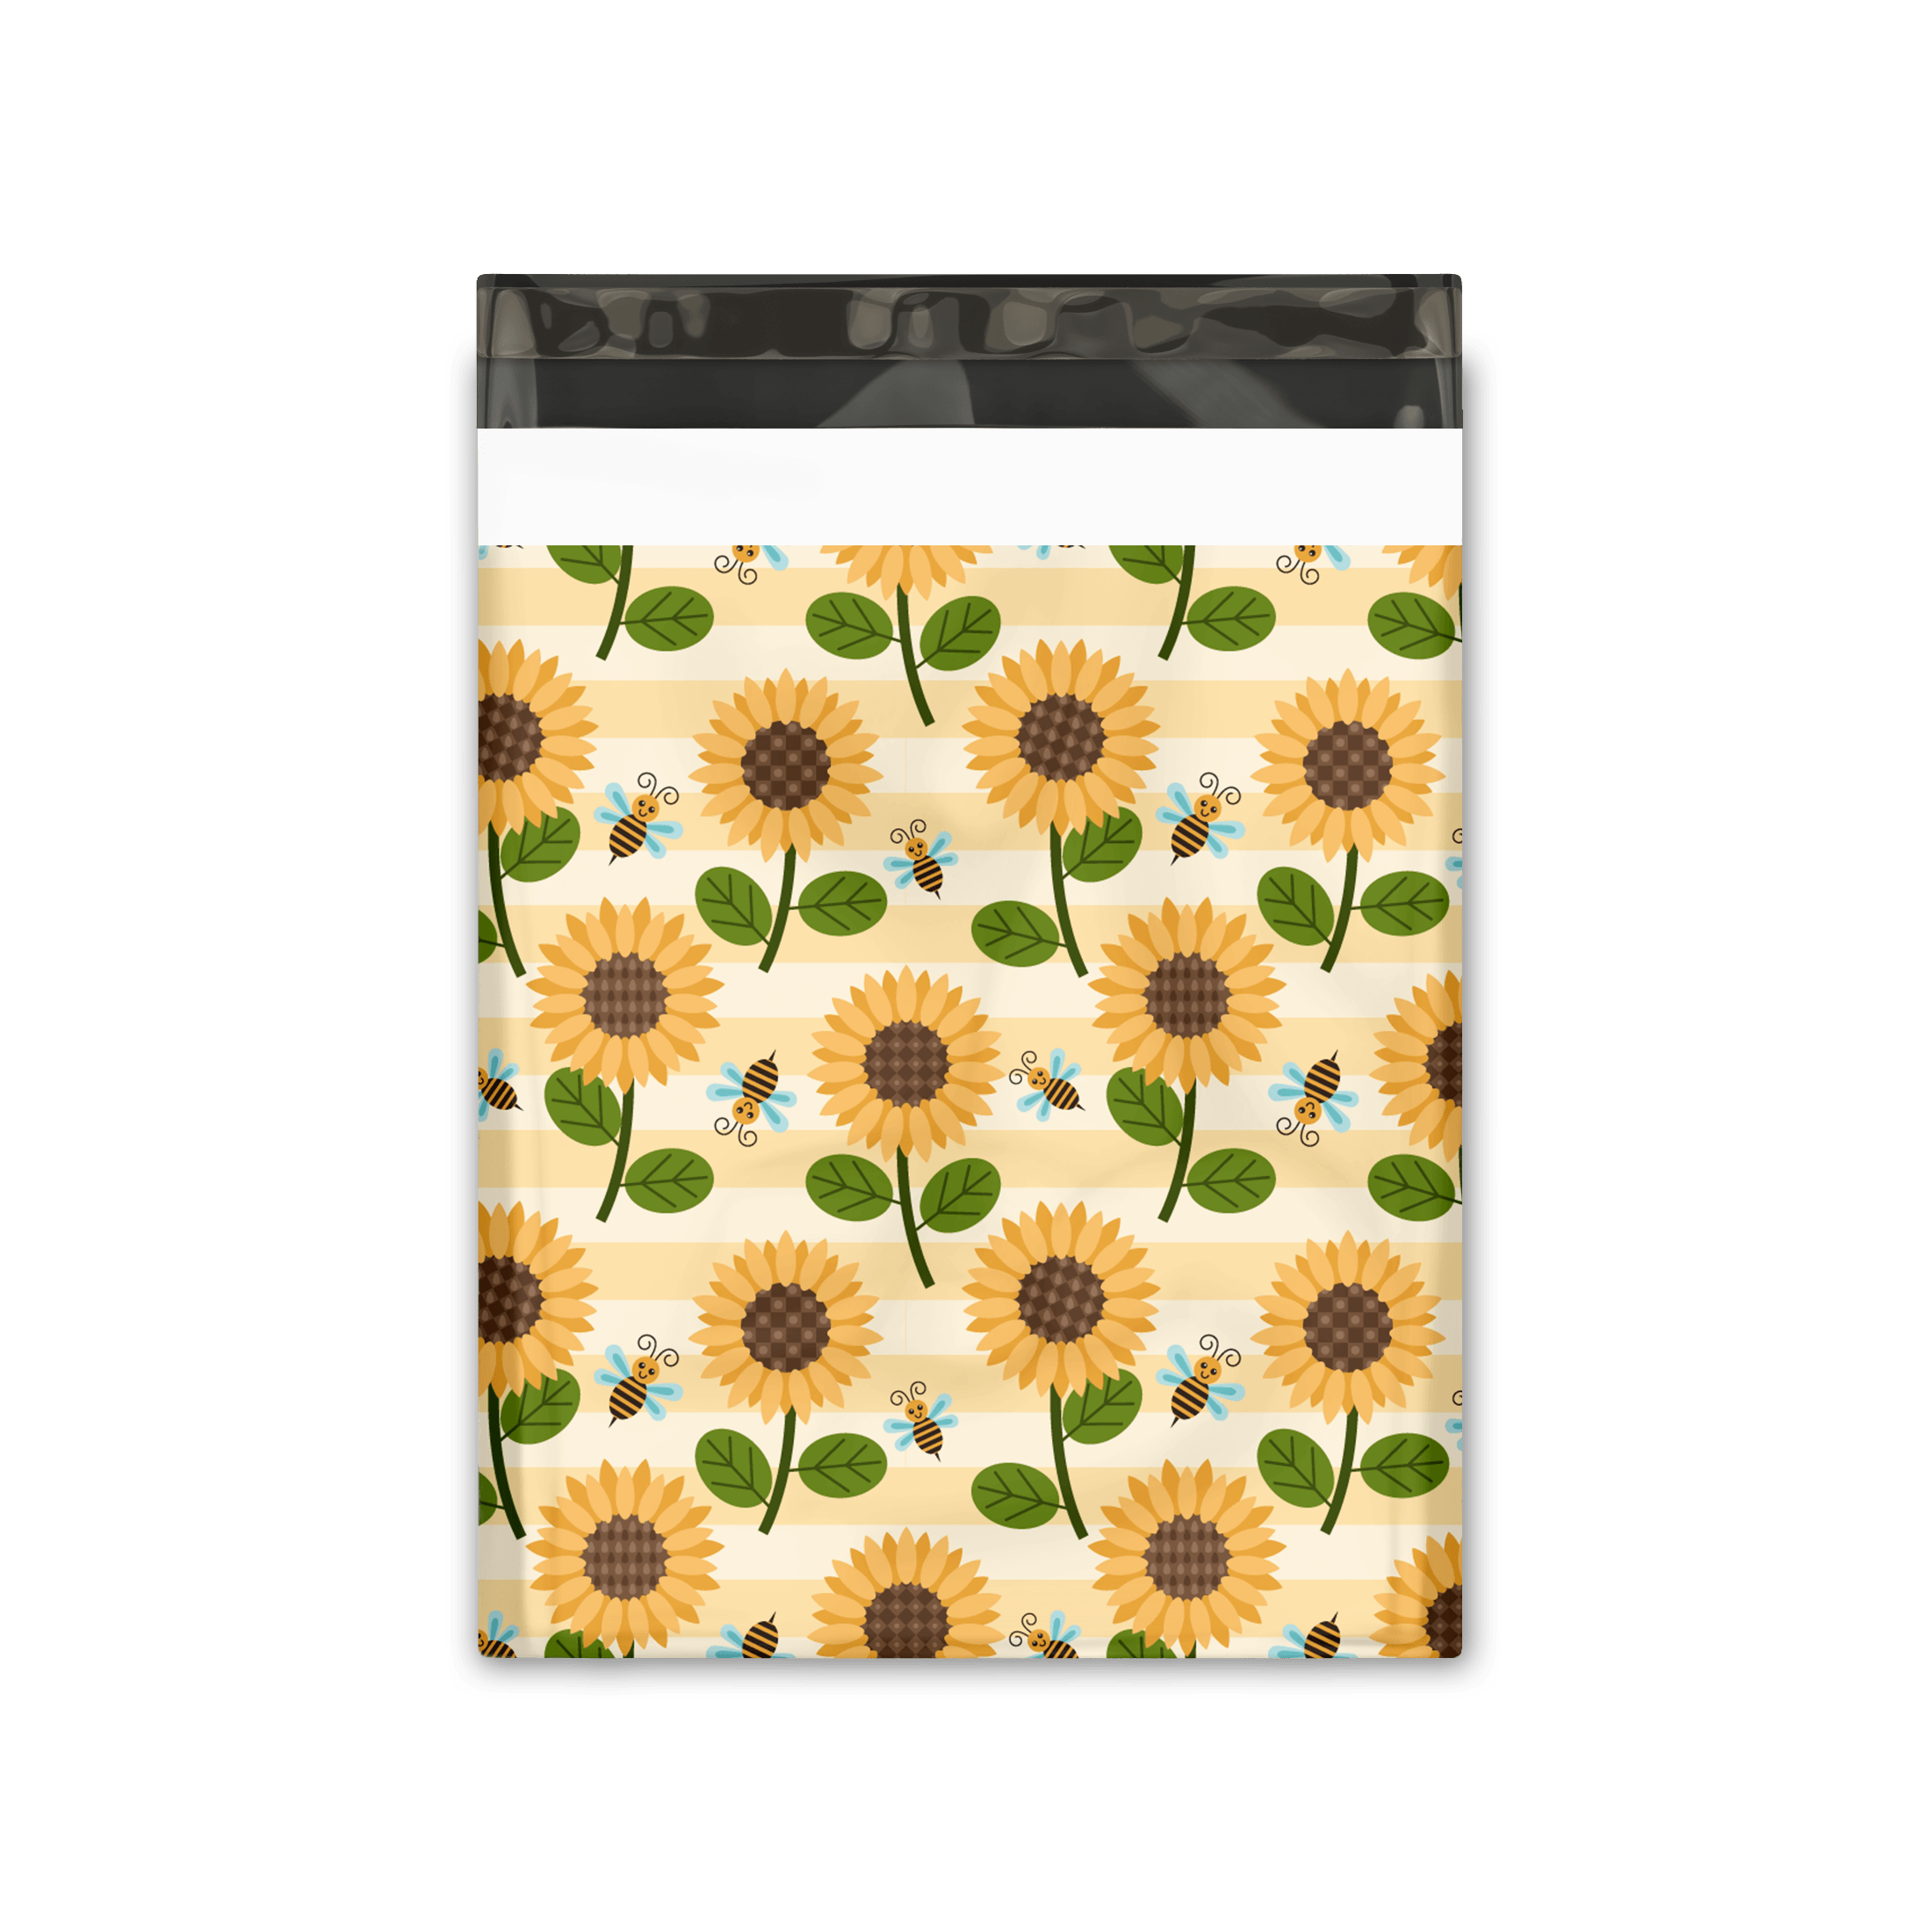 12x15" Sunflowers and Bees Designer Poly Mailers Shipping Envelopes Premium Printed Bags - Pro Supply Global